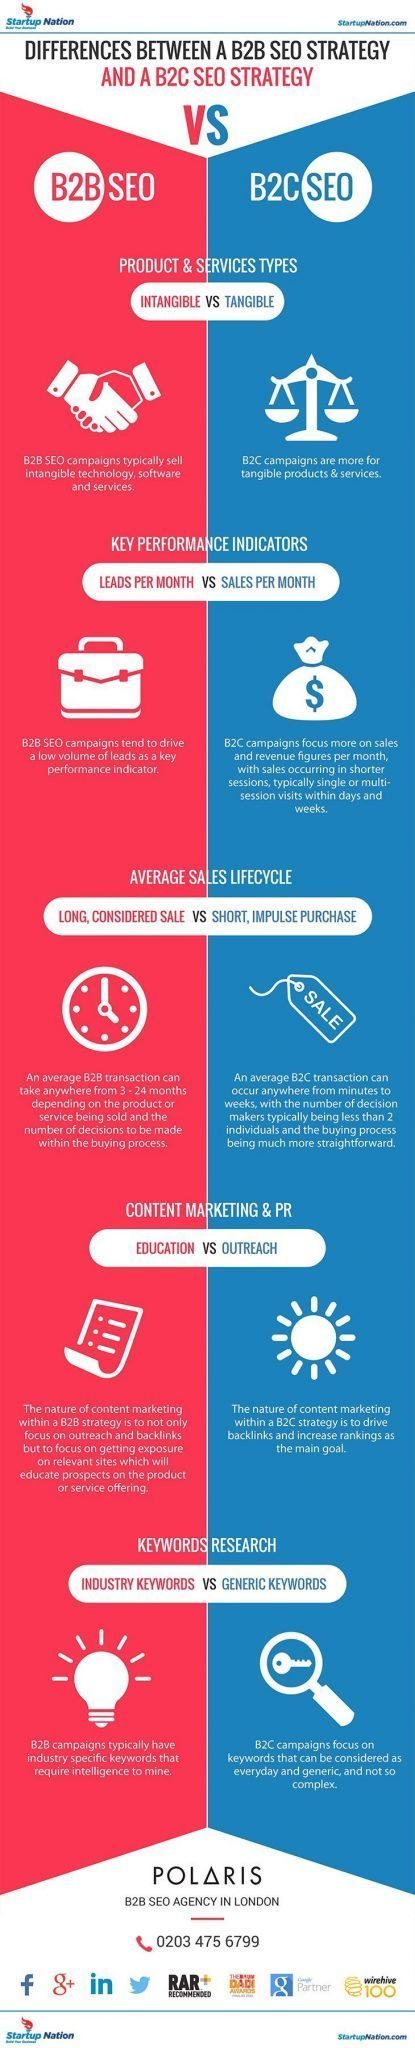 Differences-between-b2b-seo-and-b2c-seo-infographic-730px